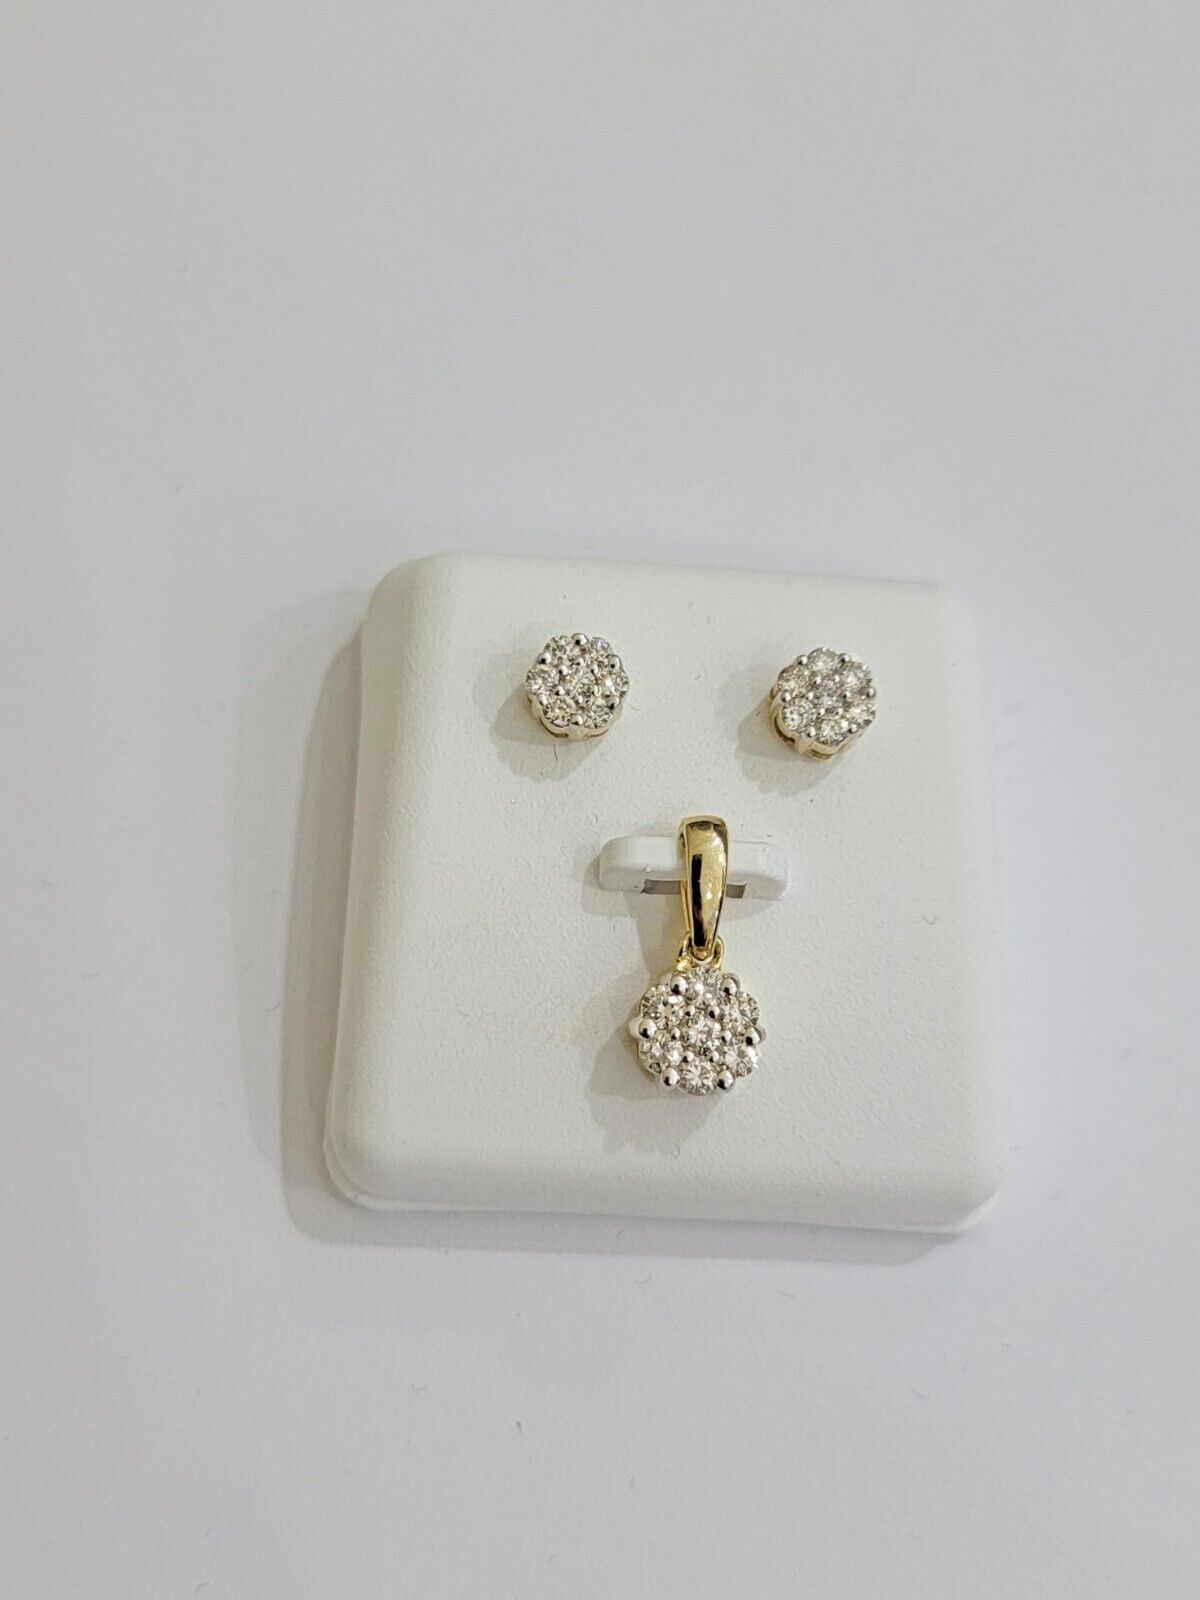 Rea 10k Gold Diamond Charm Pendant Earring Set for Ladies/ Women with FREE Chain